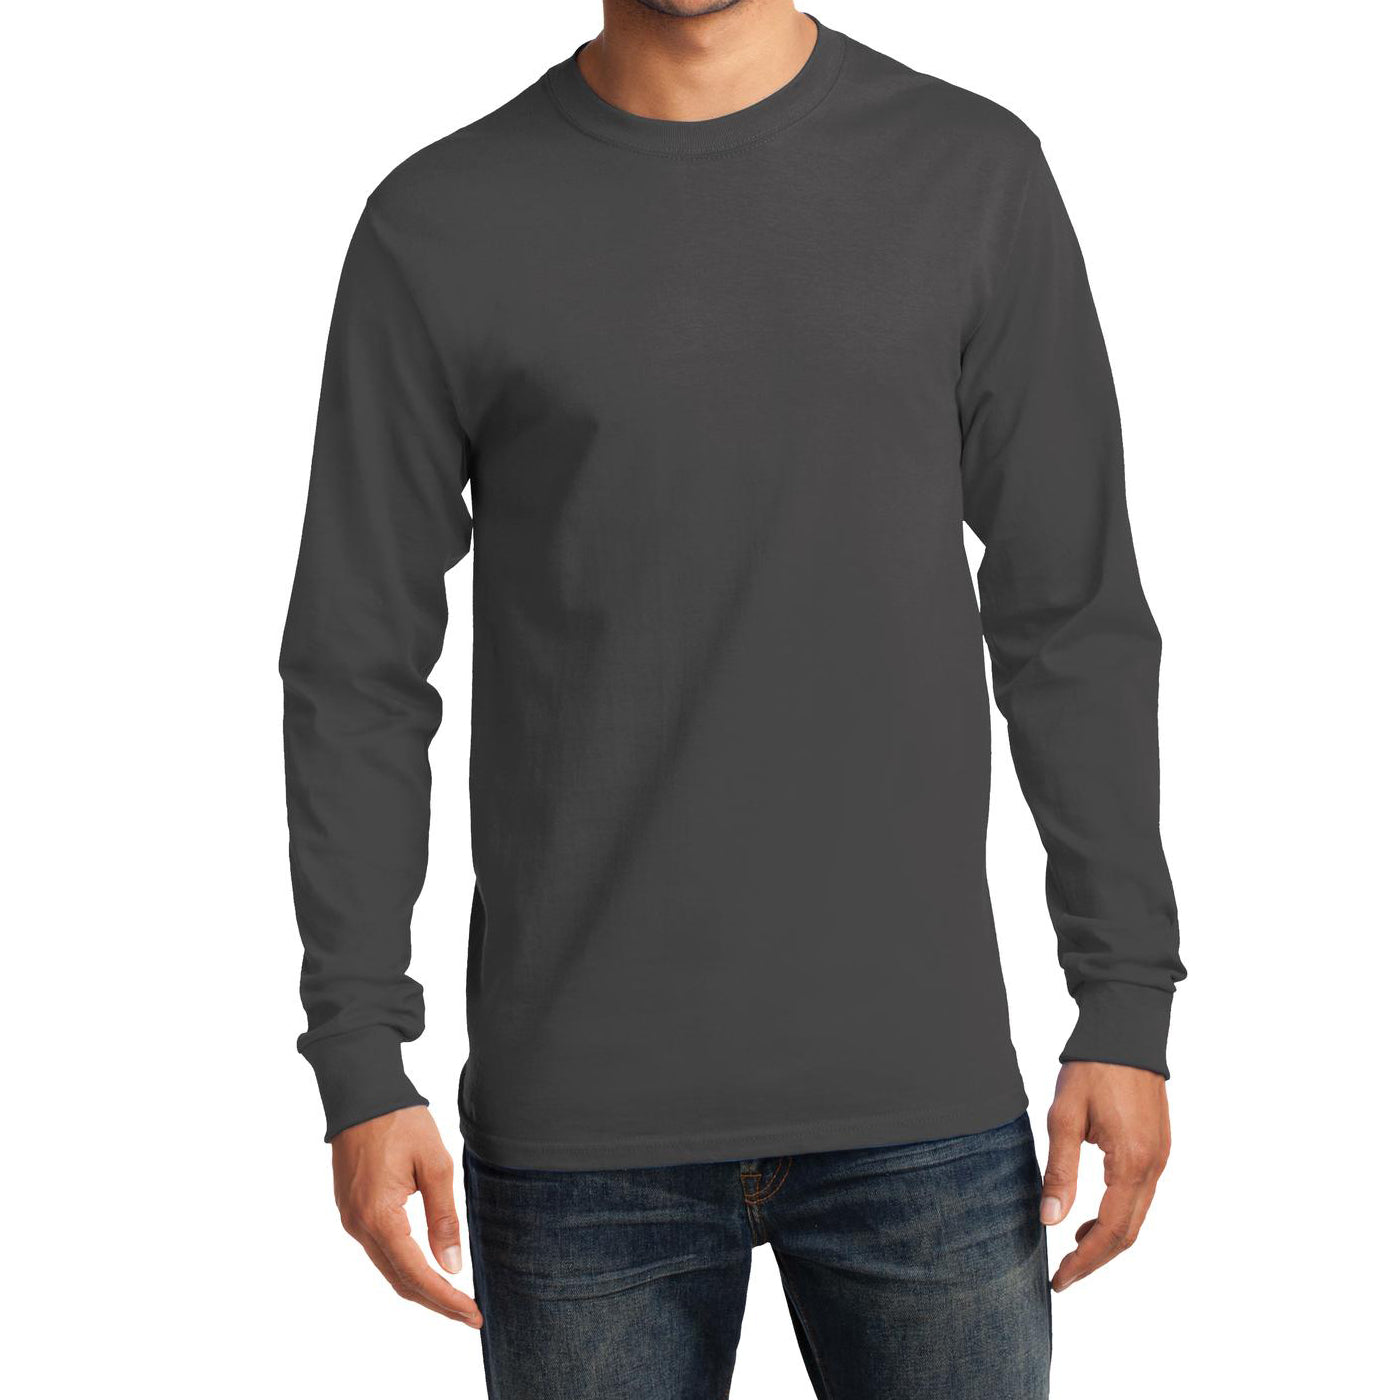 Men's Long Sleeve Essential Tee - Charcoal - Front